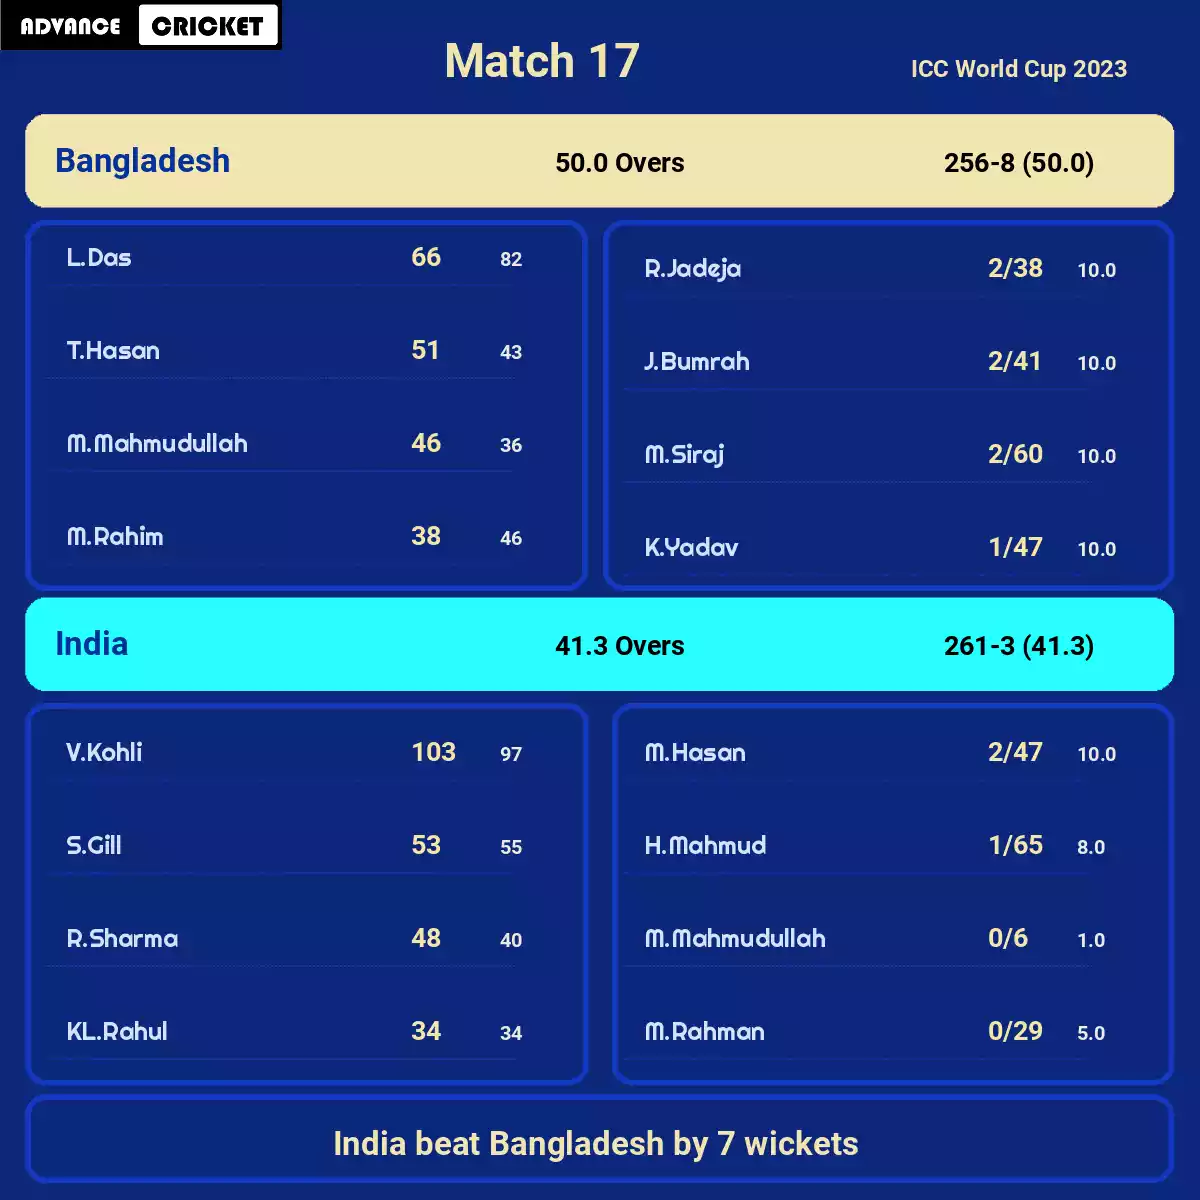 IND vs BAN Match 17 ICC World Cup 2023